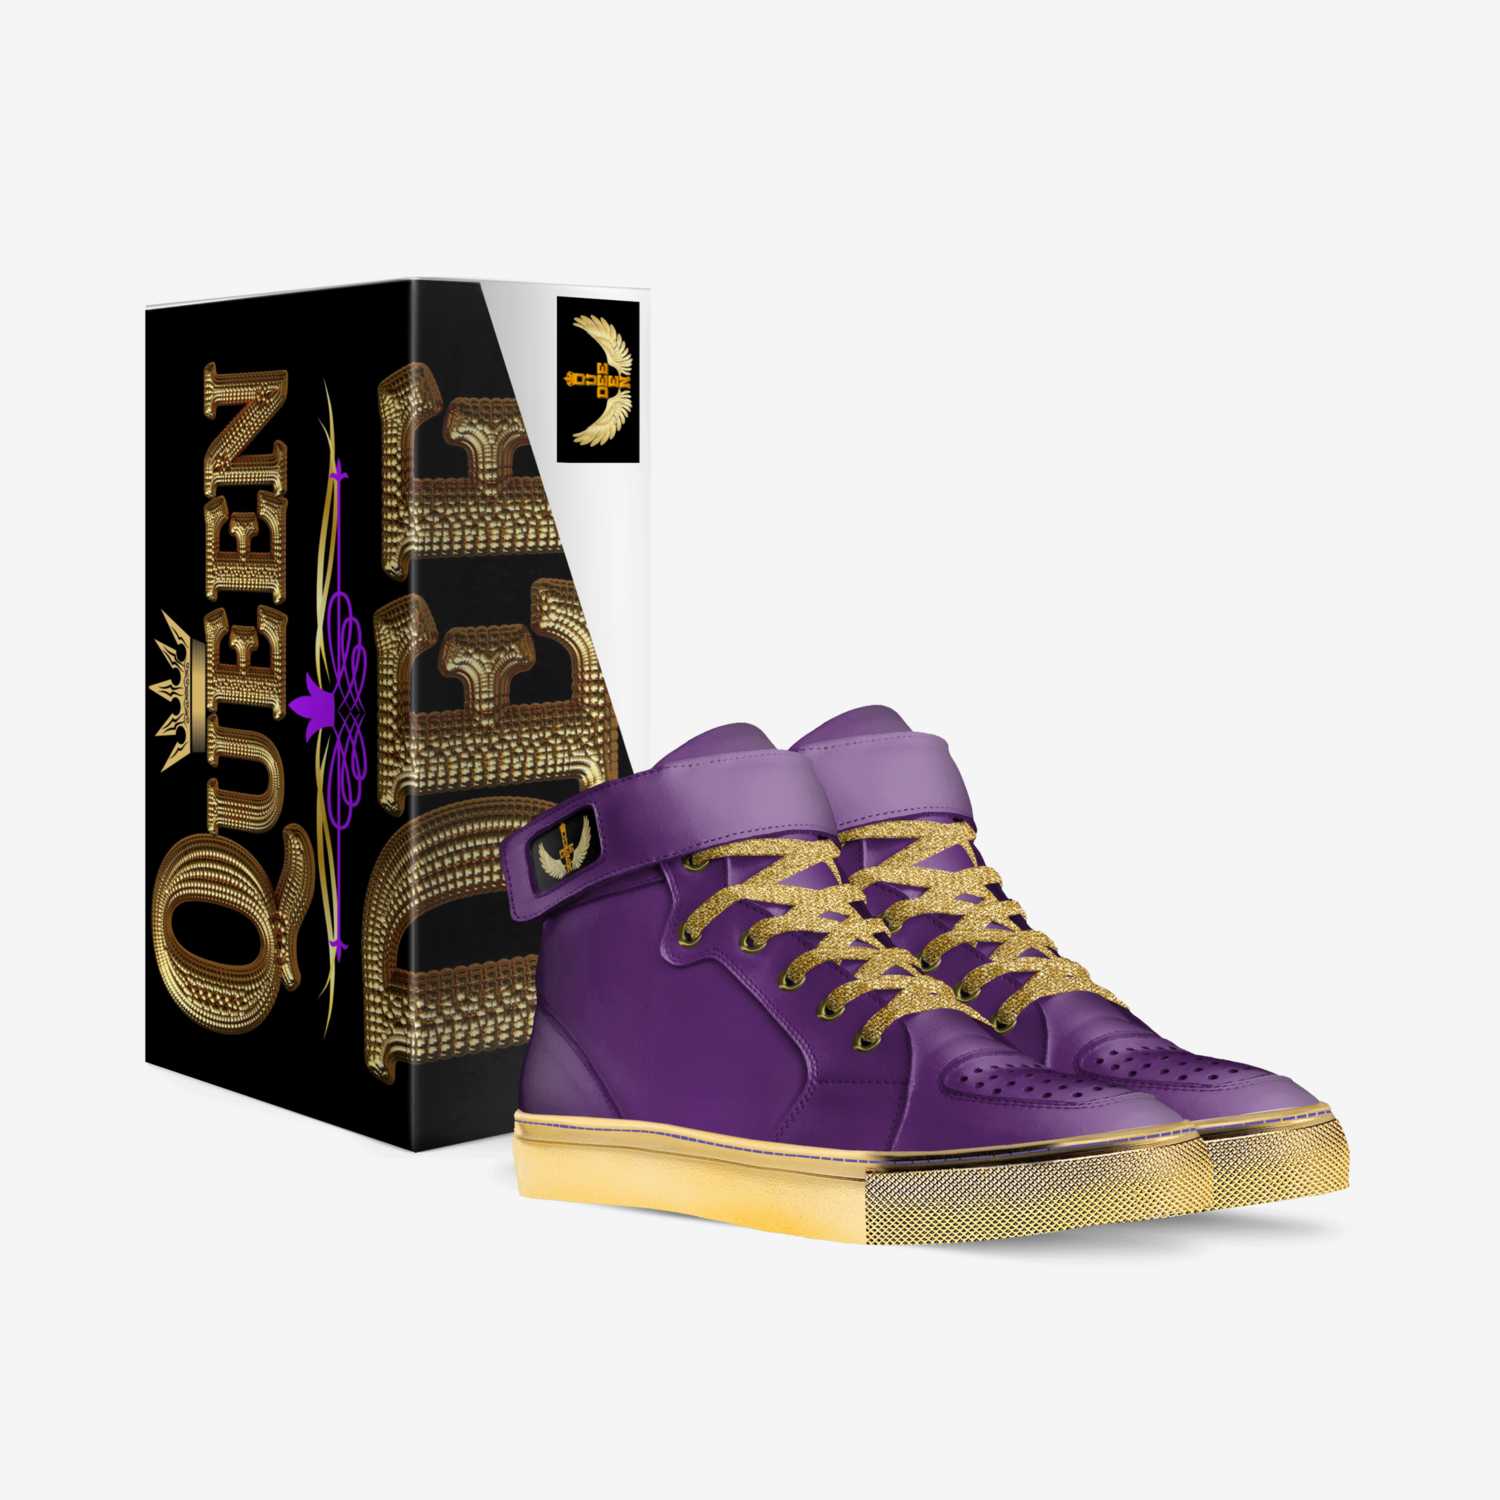 Queen Dee custom made in Italy shoes by Latoya Chambliss | Box view